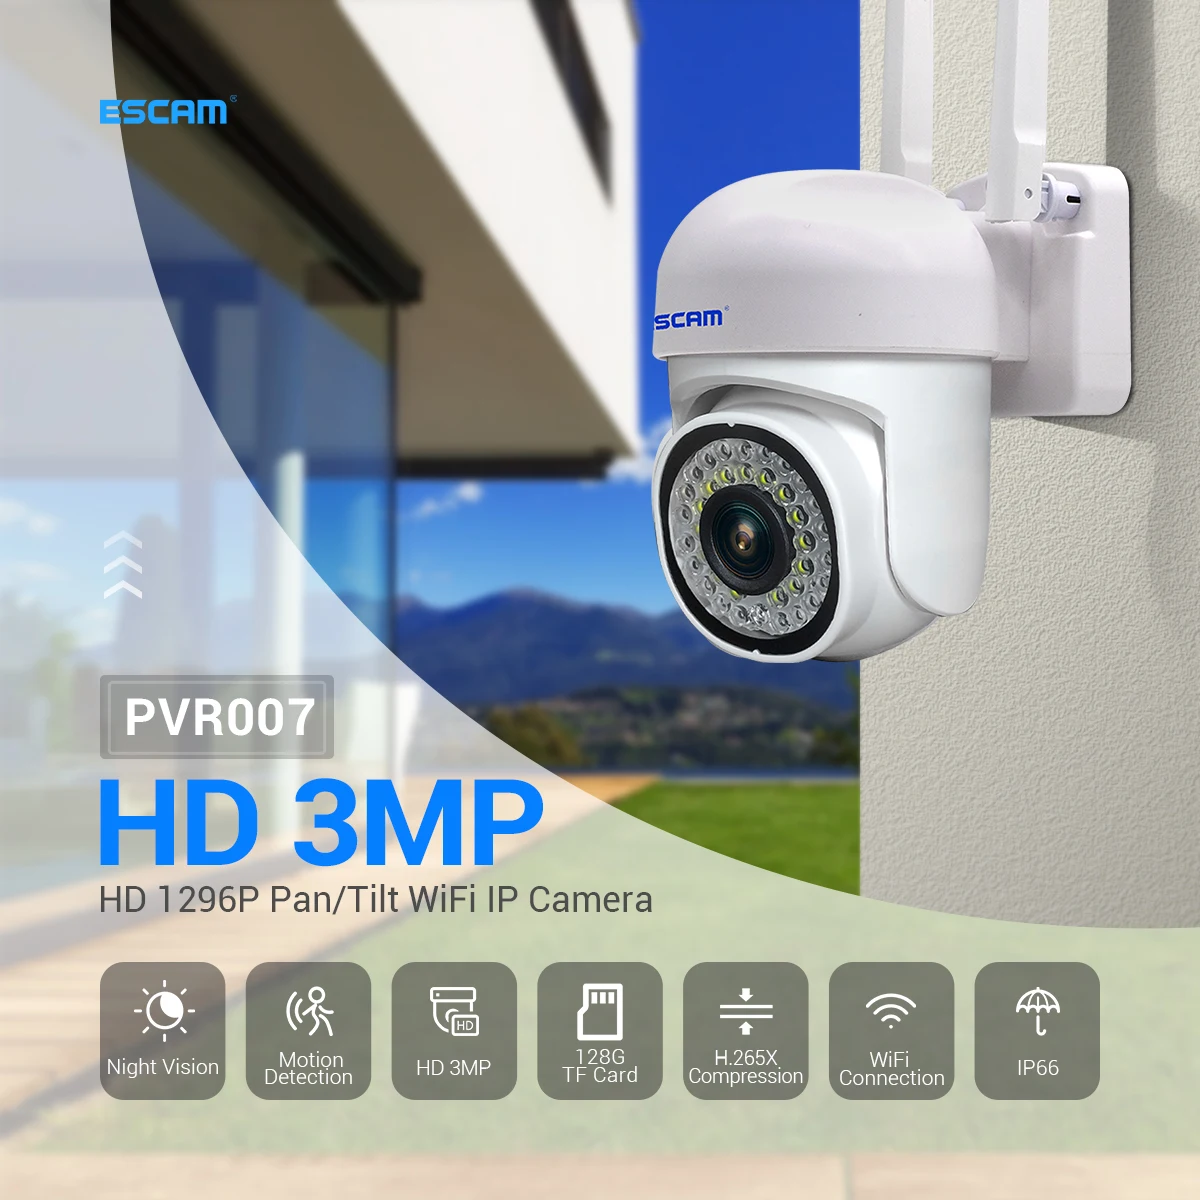 

ESCAM PVR007 Security Camera H.265 3MP Full HD Color Night Vision Motion Detection Sound Alarm WiFi Camera IP66